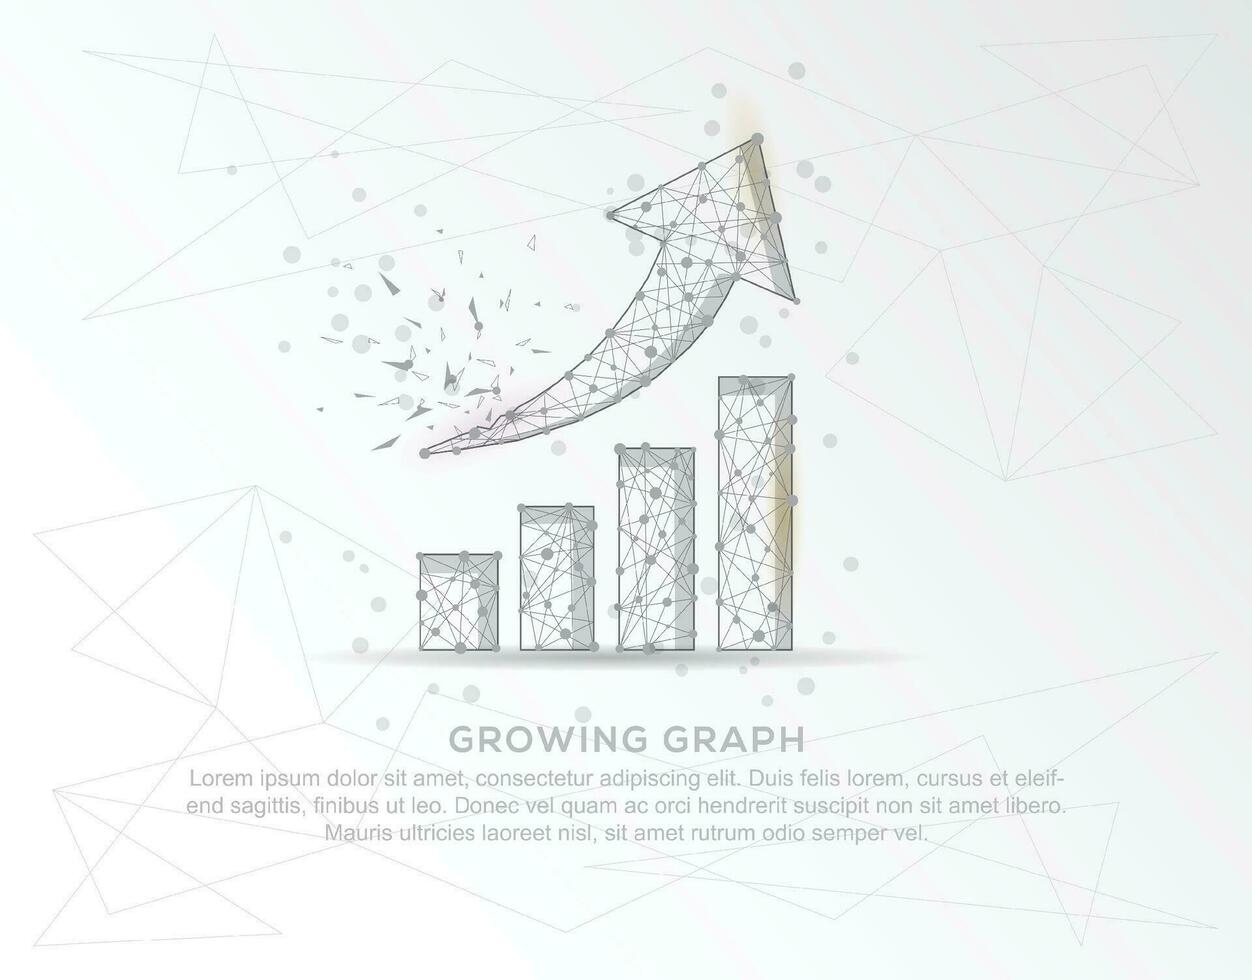 Growing up graph chart abstract mash line and composition digitally drawn in the form of broken a part triangle shape and scattered dots. vector